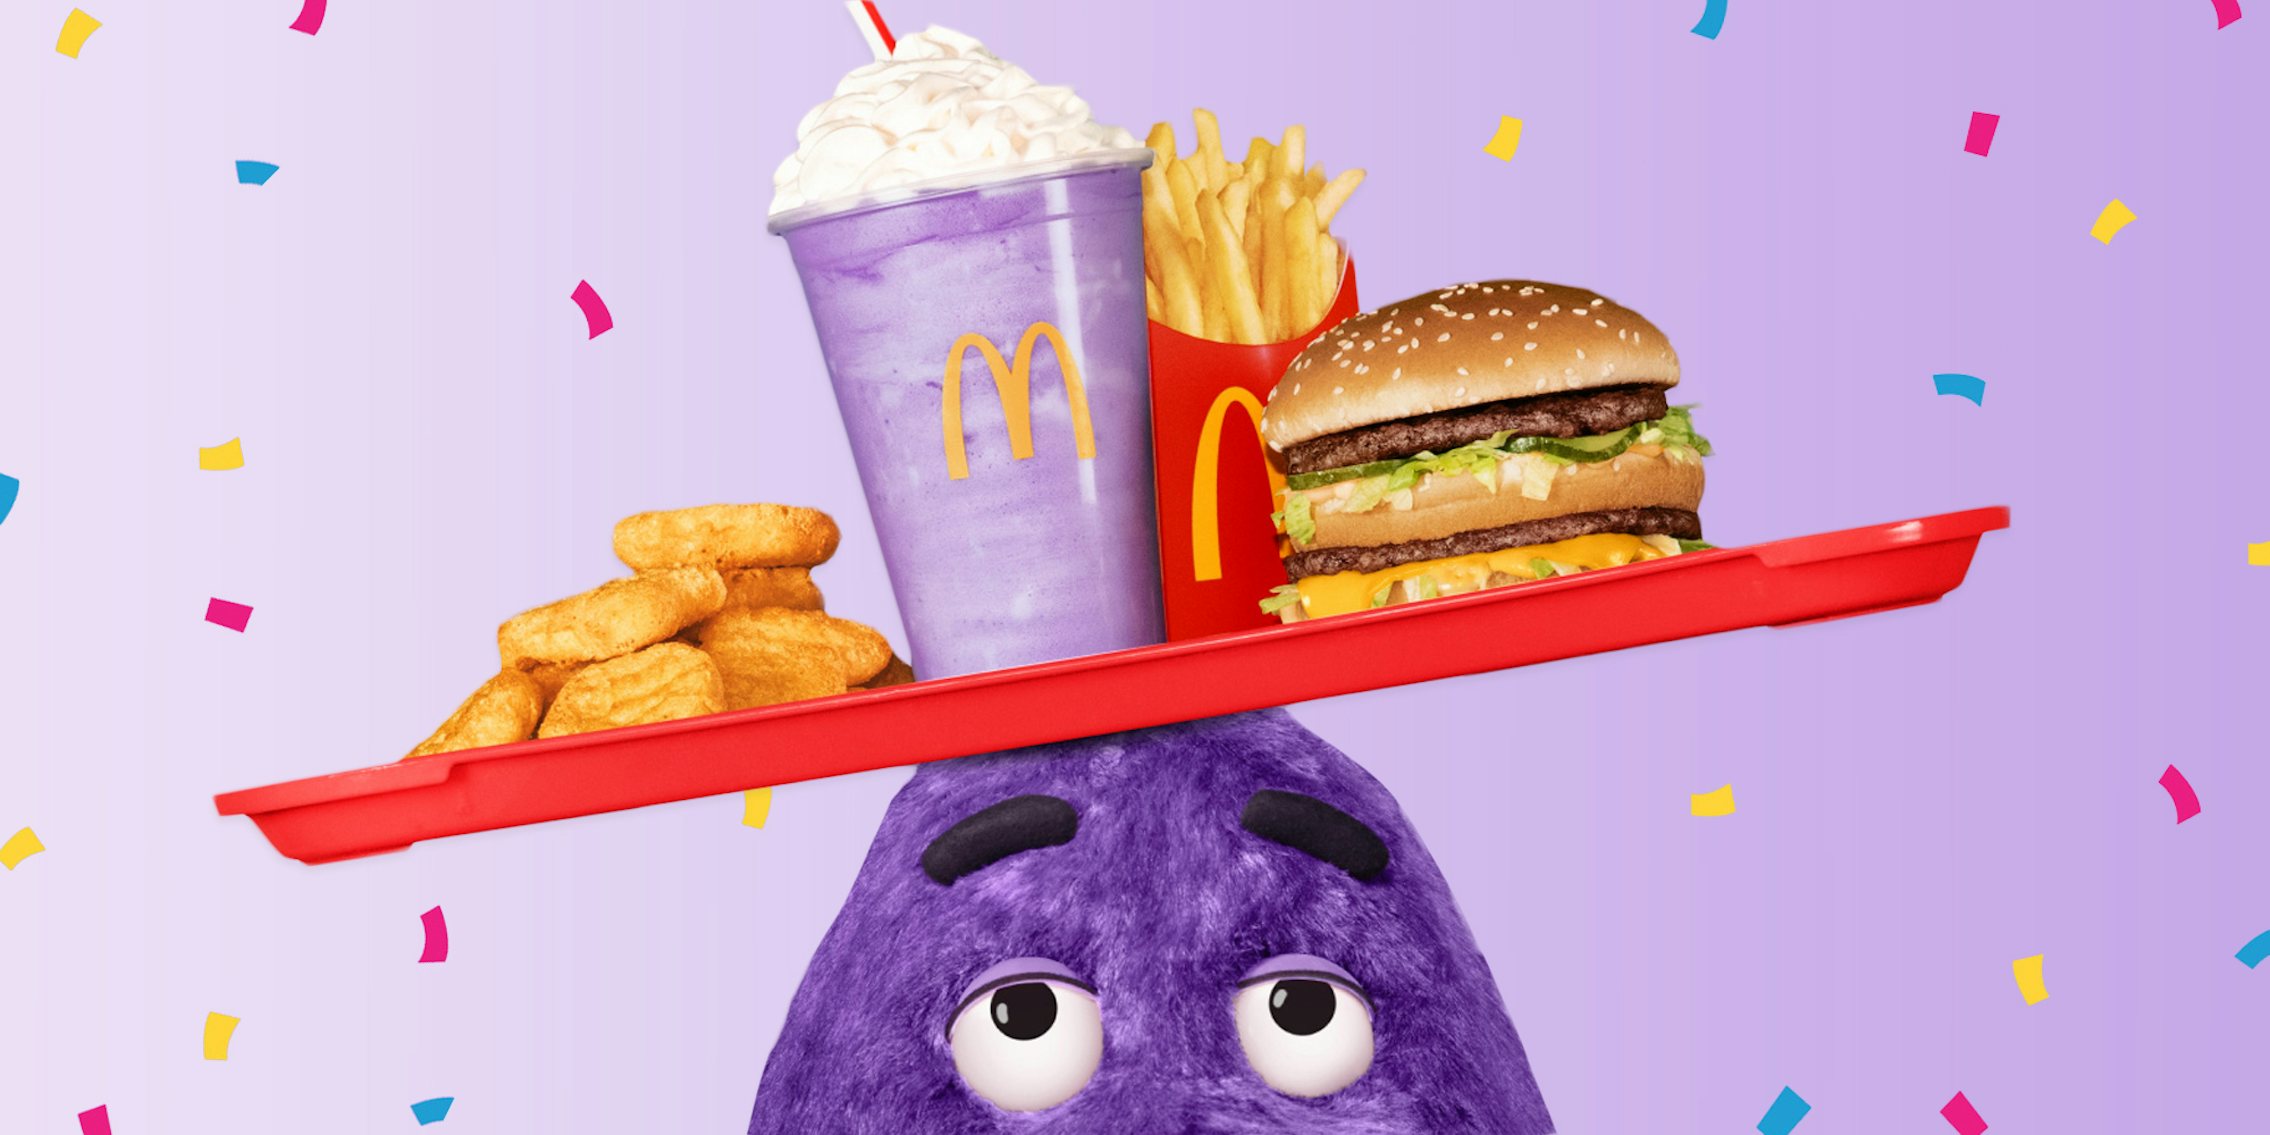 Grimace Birthday Meal on platter on Grimace's head in front of purple background with confetti